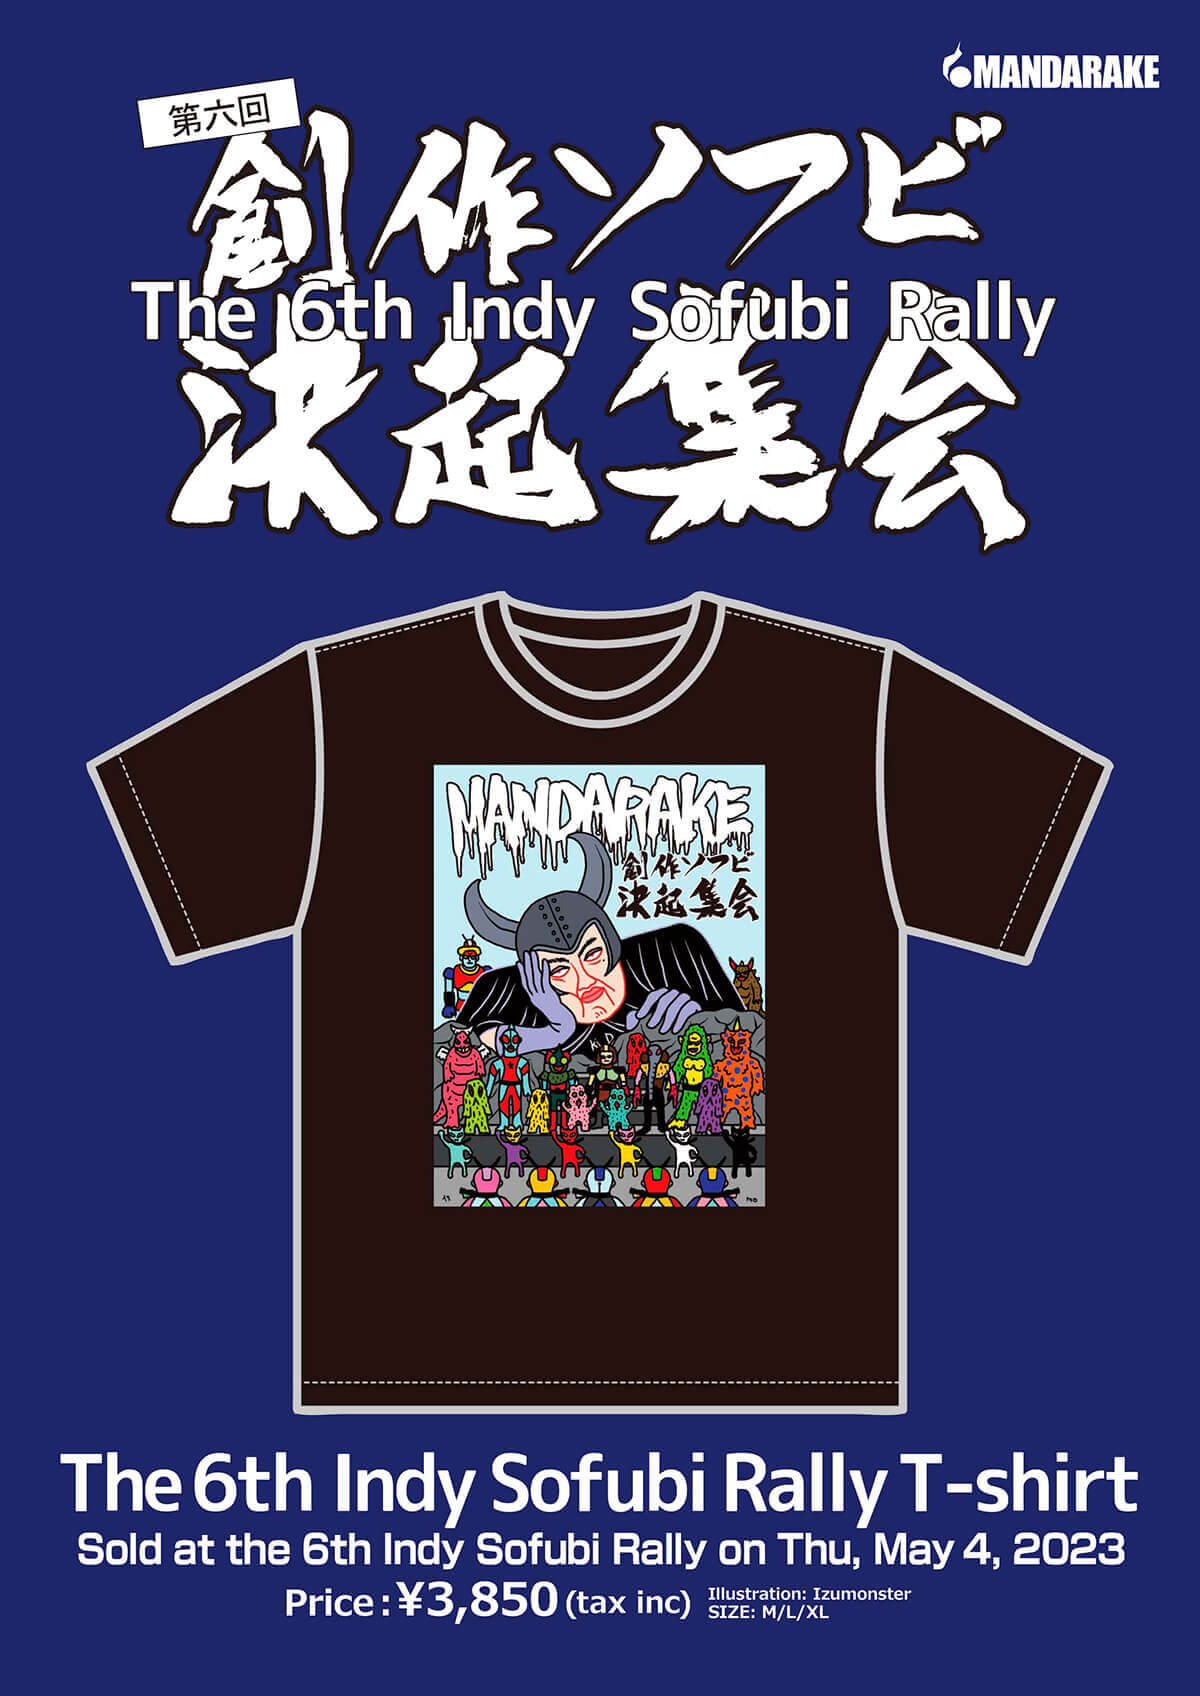 The 5th Indy Sofubi Rally T-shirt Sold at the 4th Inst Sofubi Rally on August 14, 2022 (Sun) ¥3,300 (tax inc)